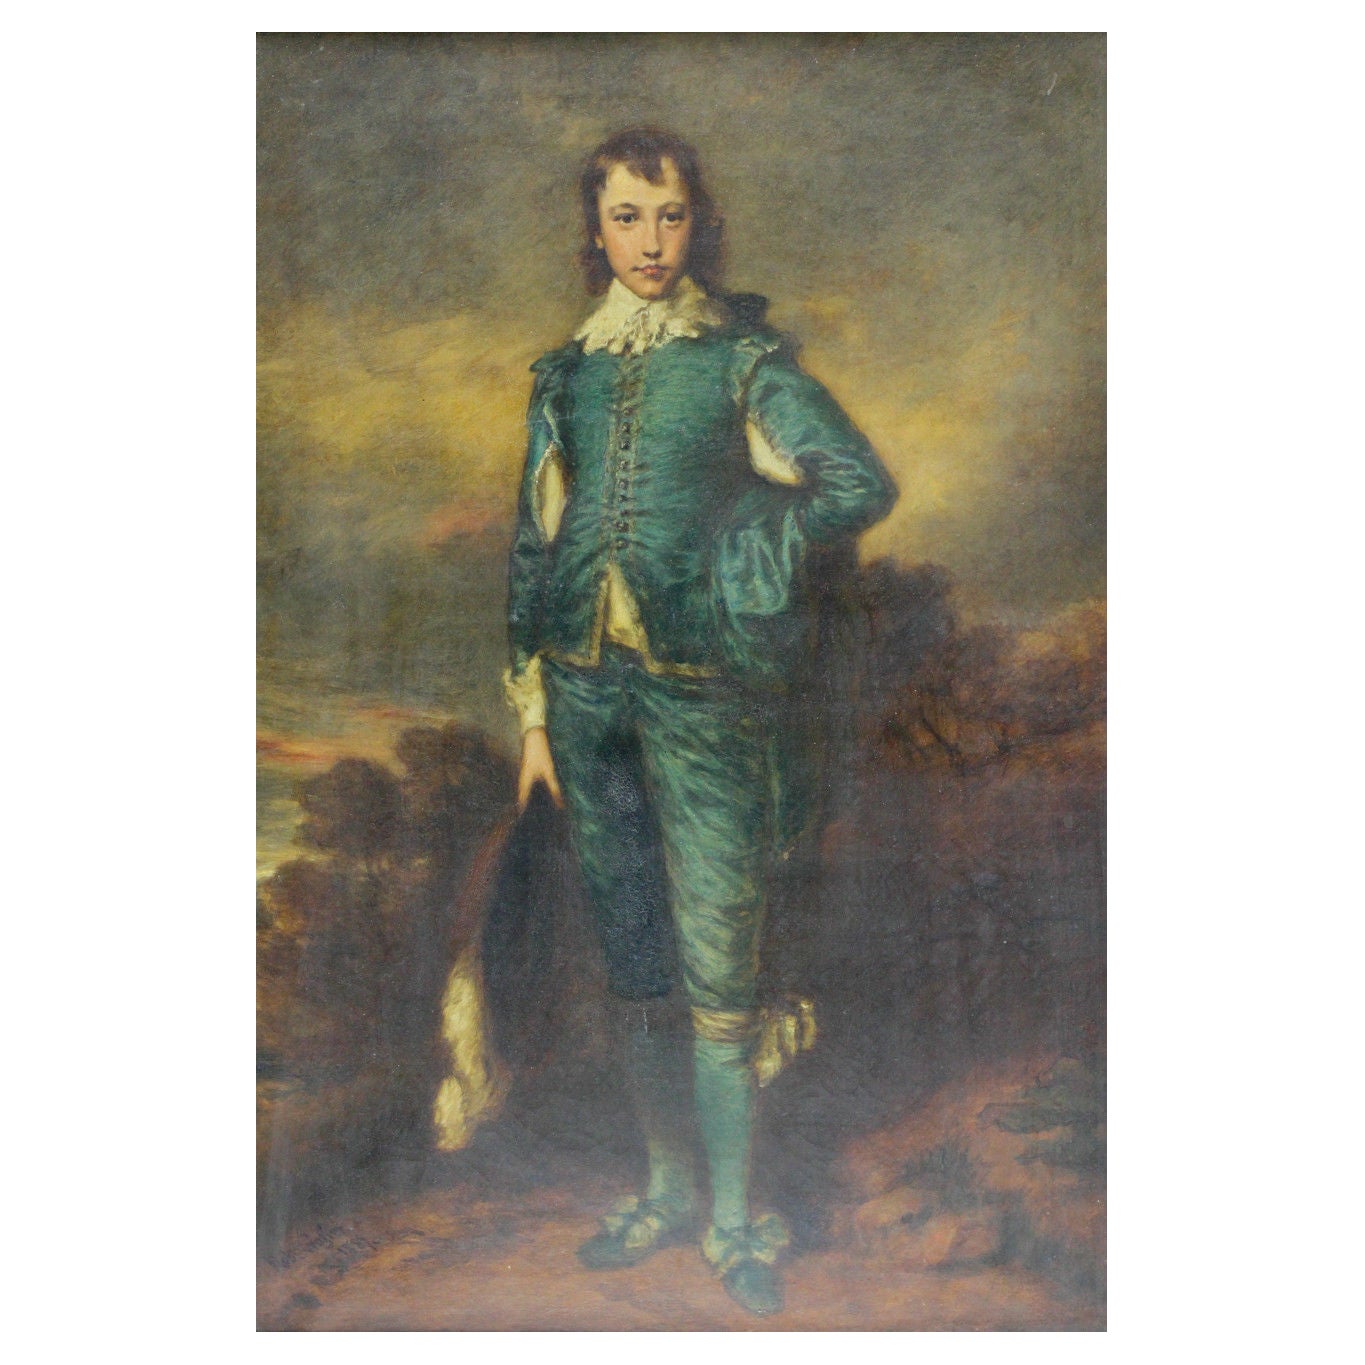 Robert Crozier Oil on Canvas Painting Blue Boy After Gainsborough For Sale